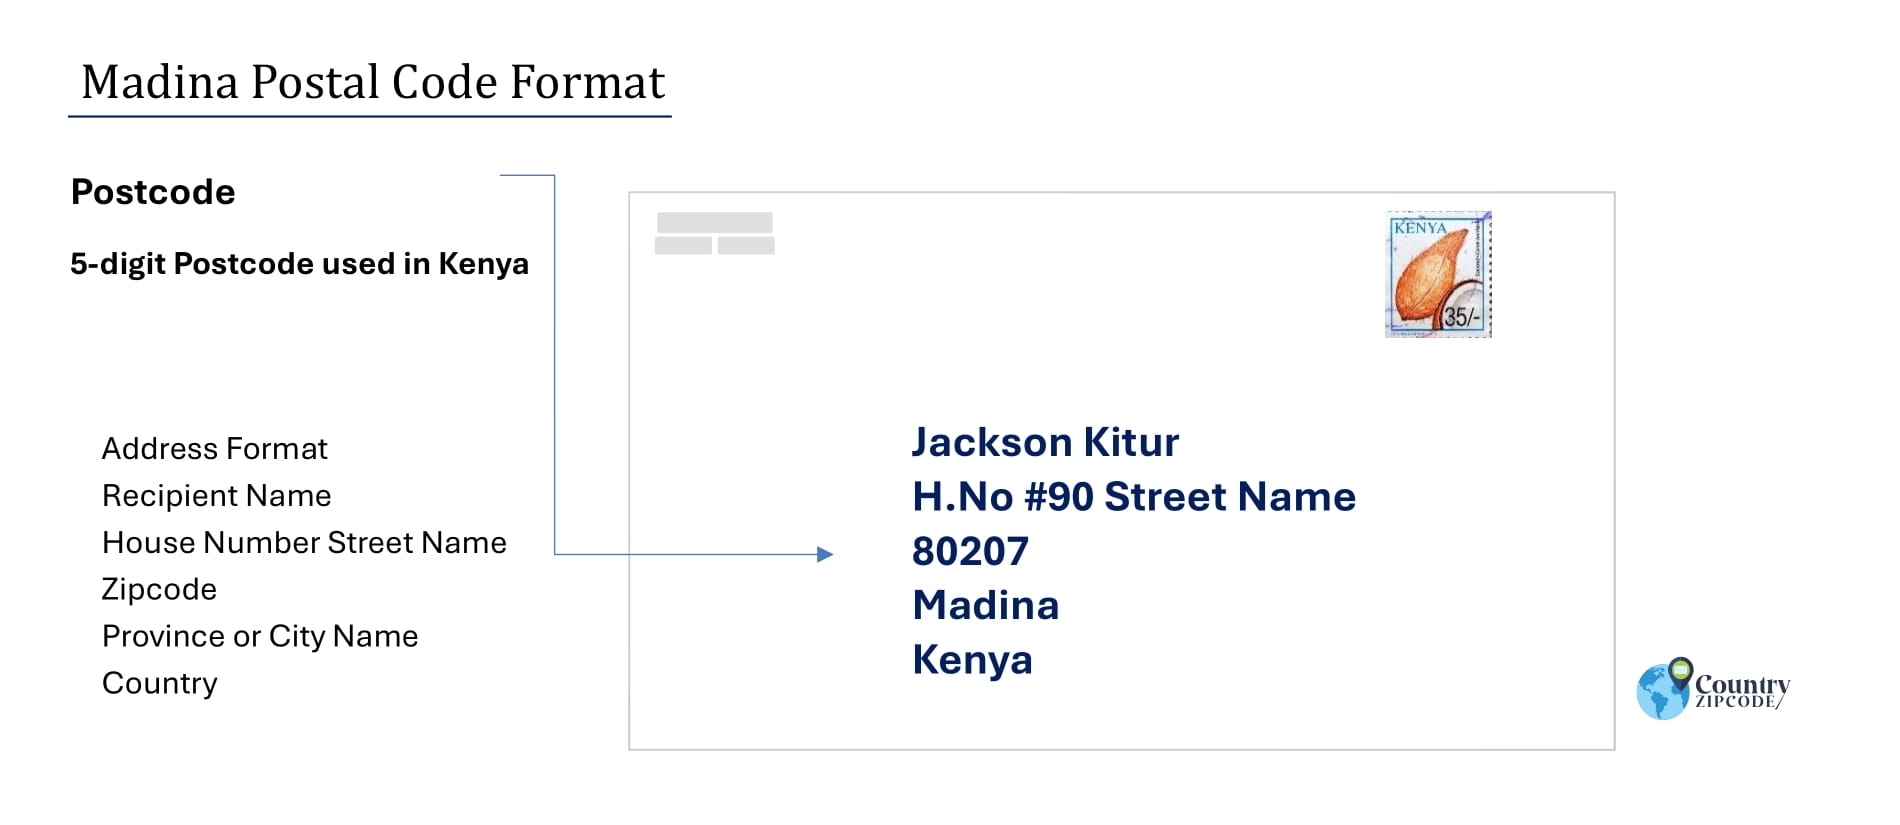 Example of Madina Address and postal code format